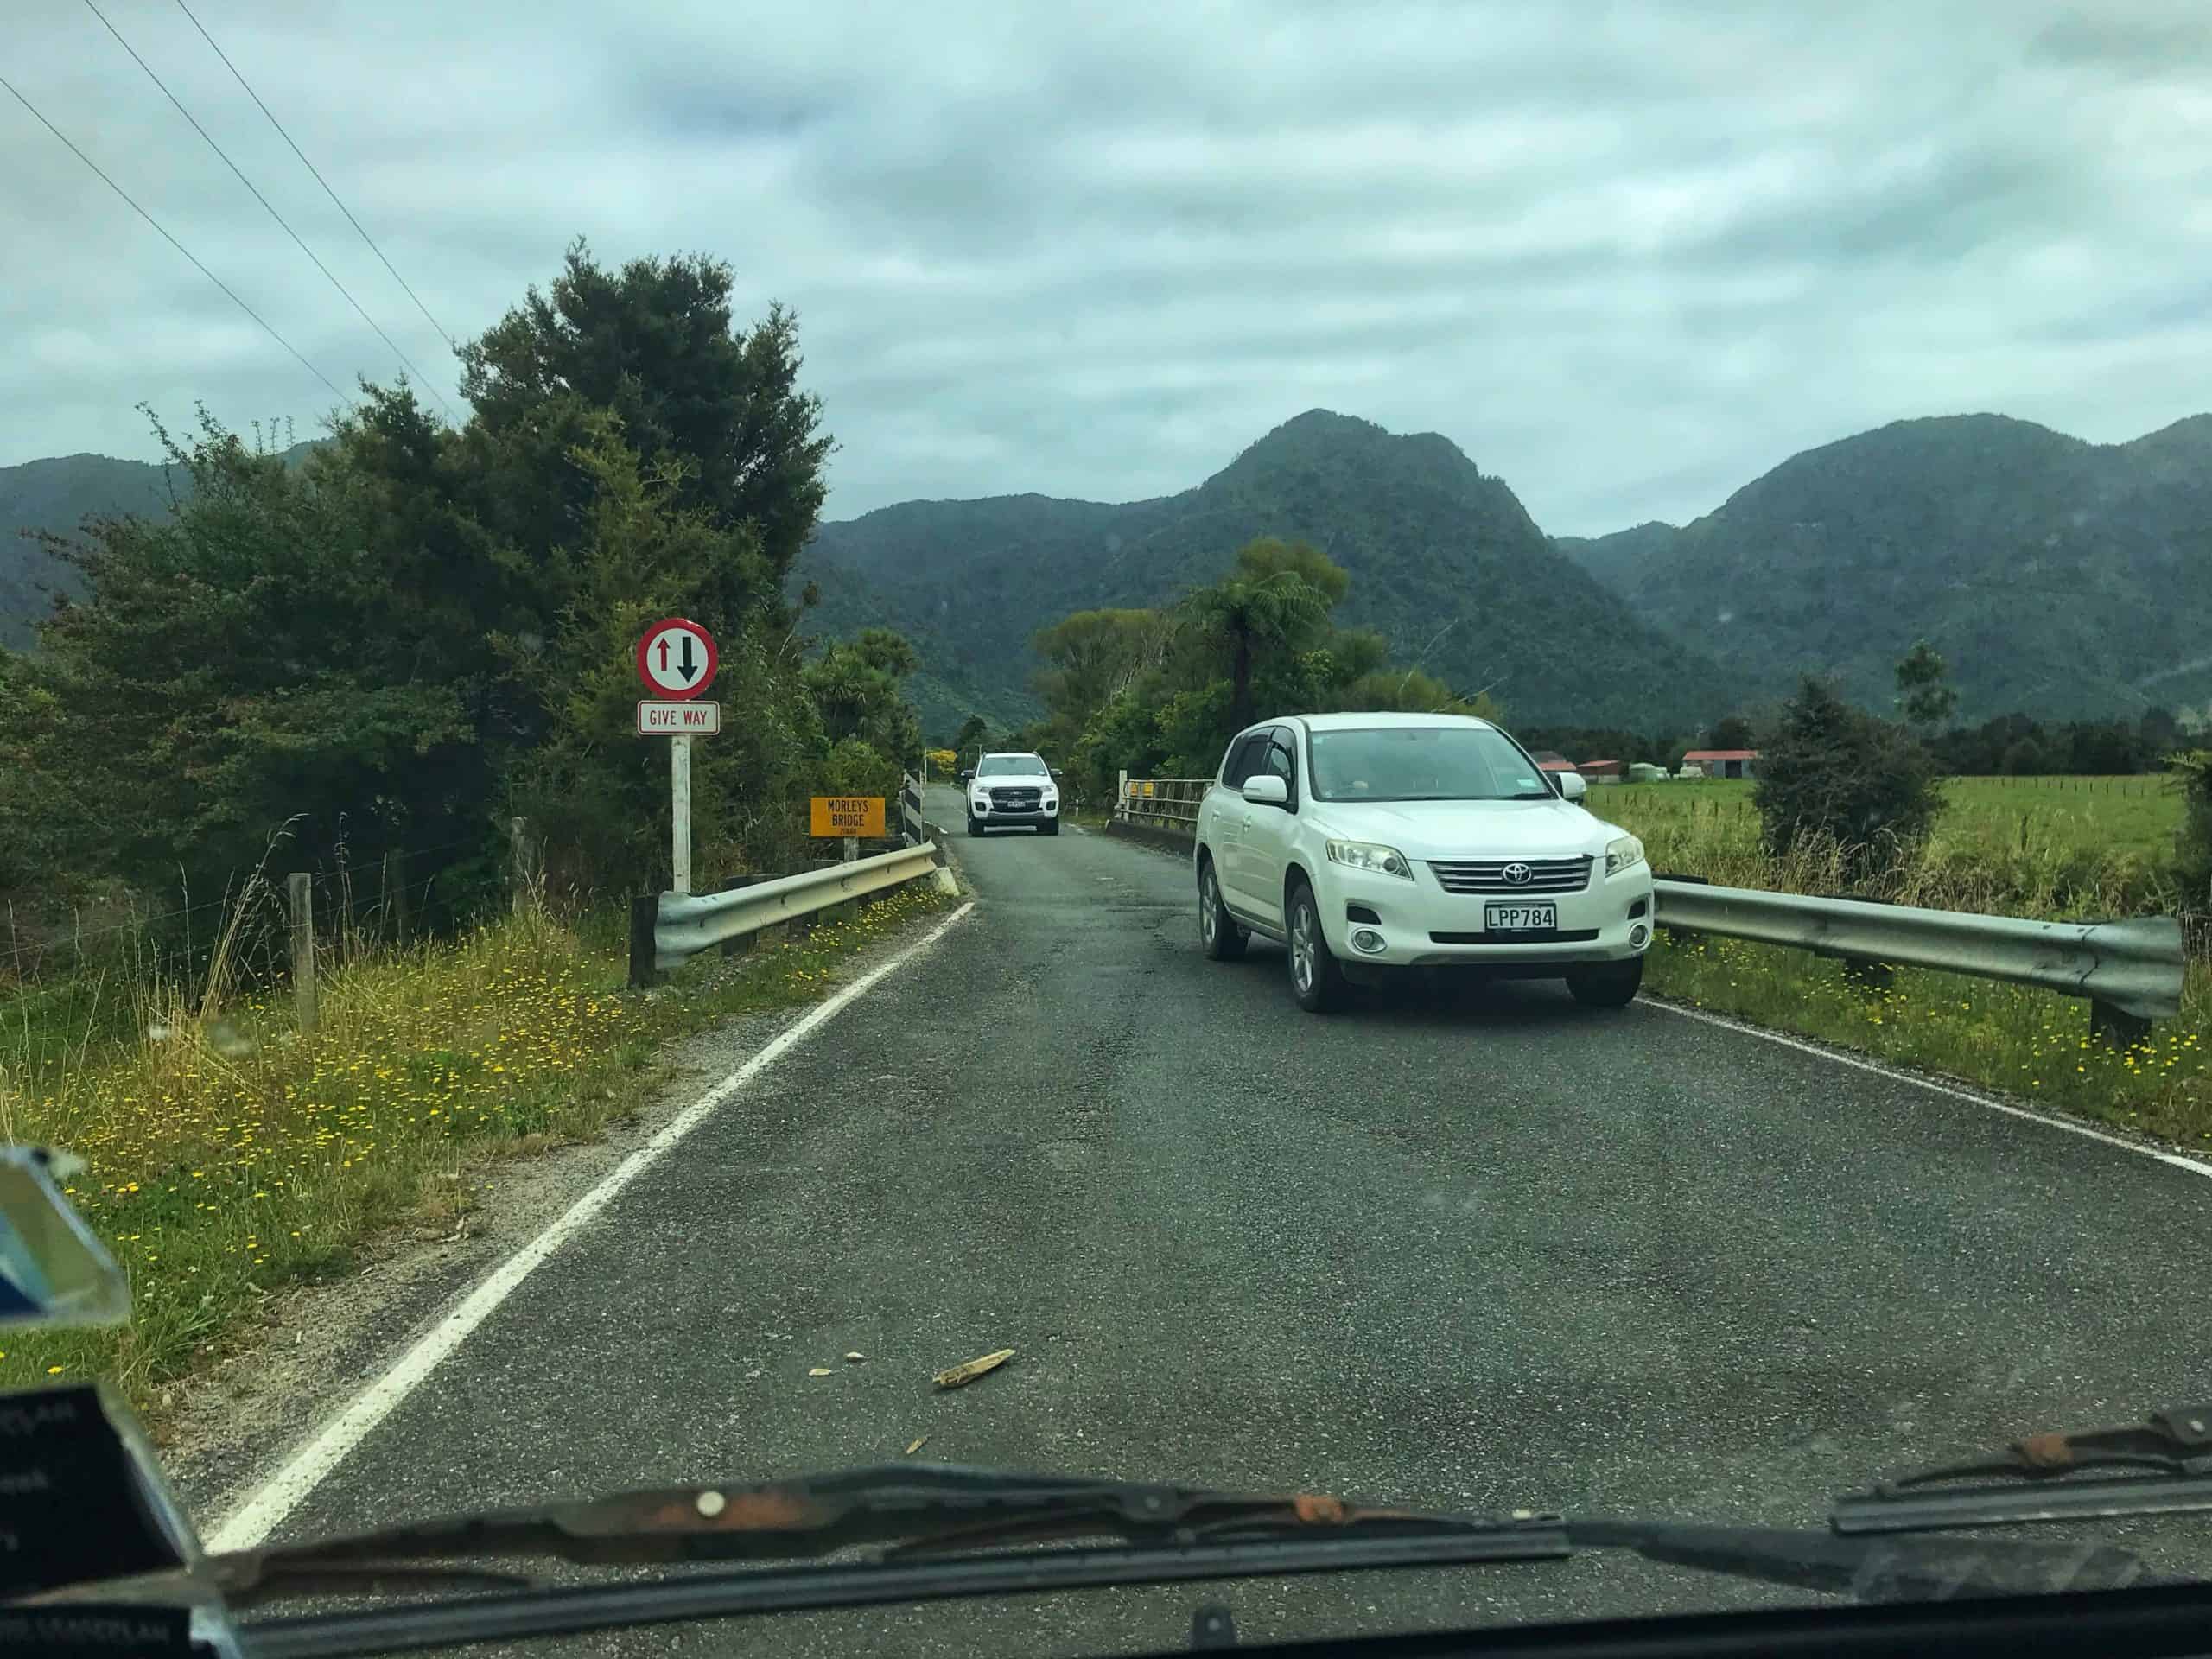 Queuing at a one lane bridge in New Zealand